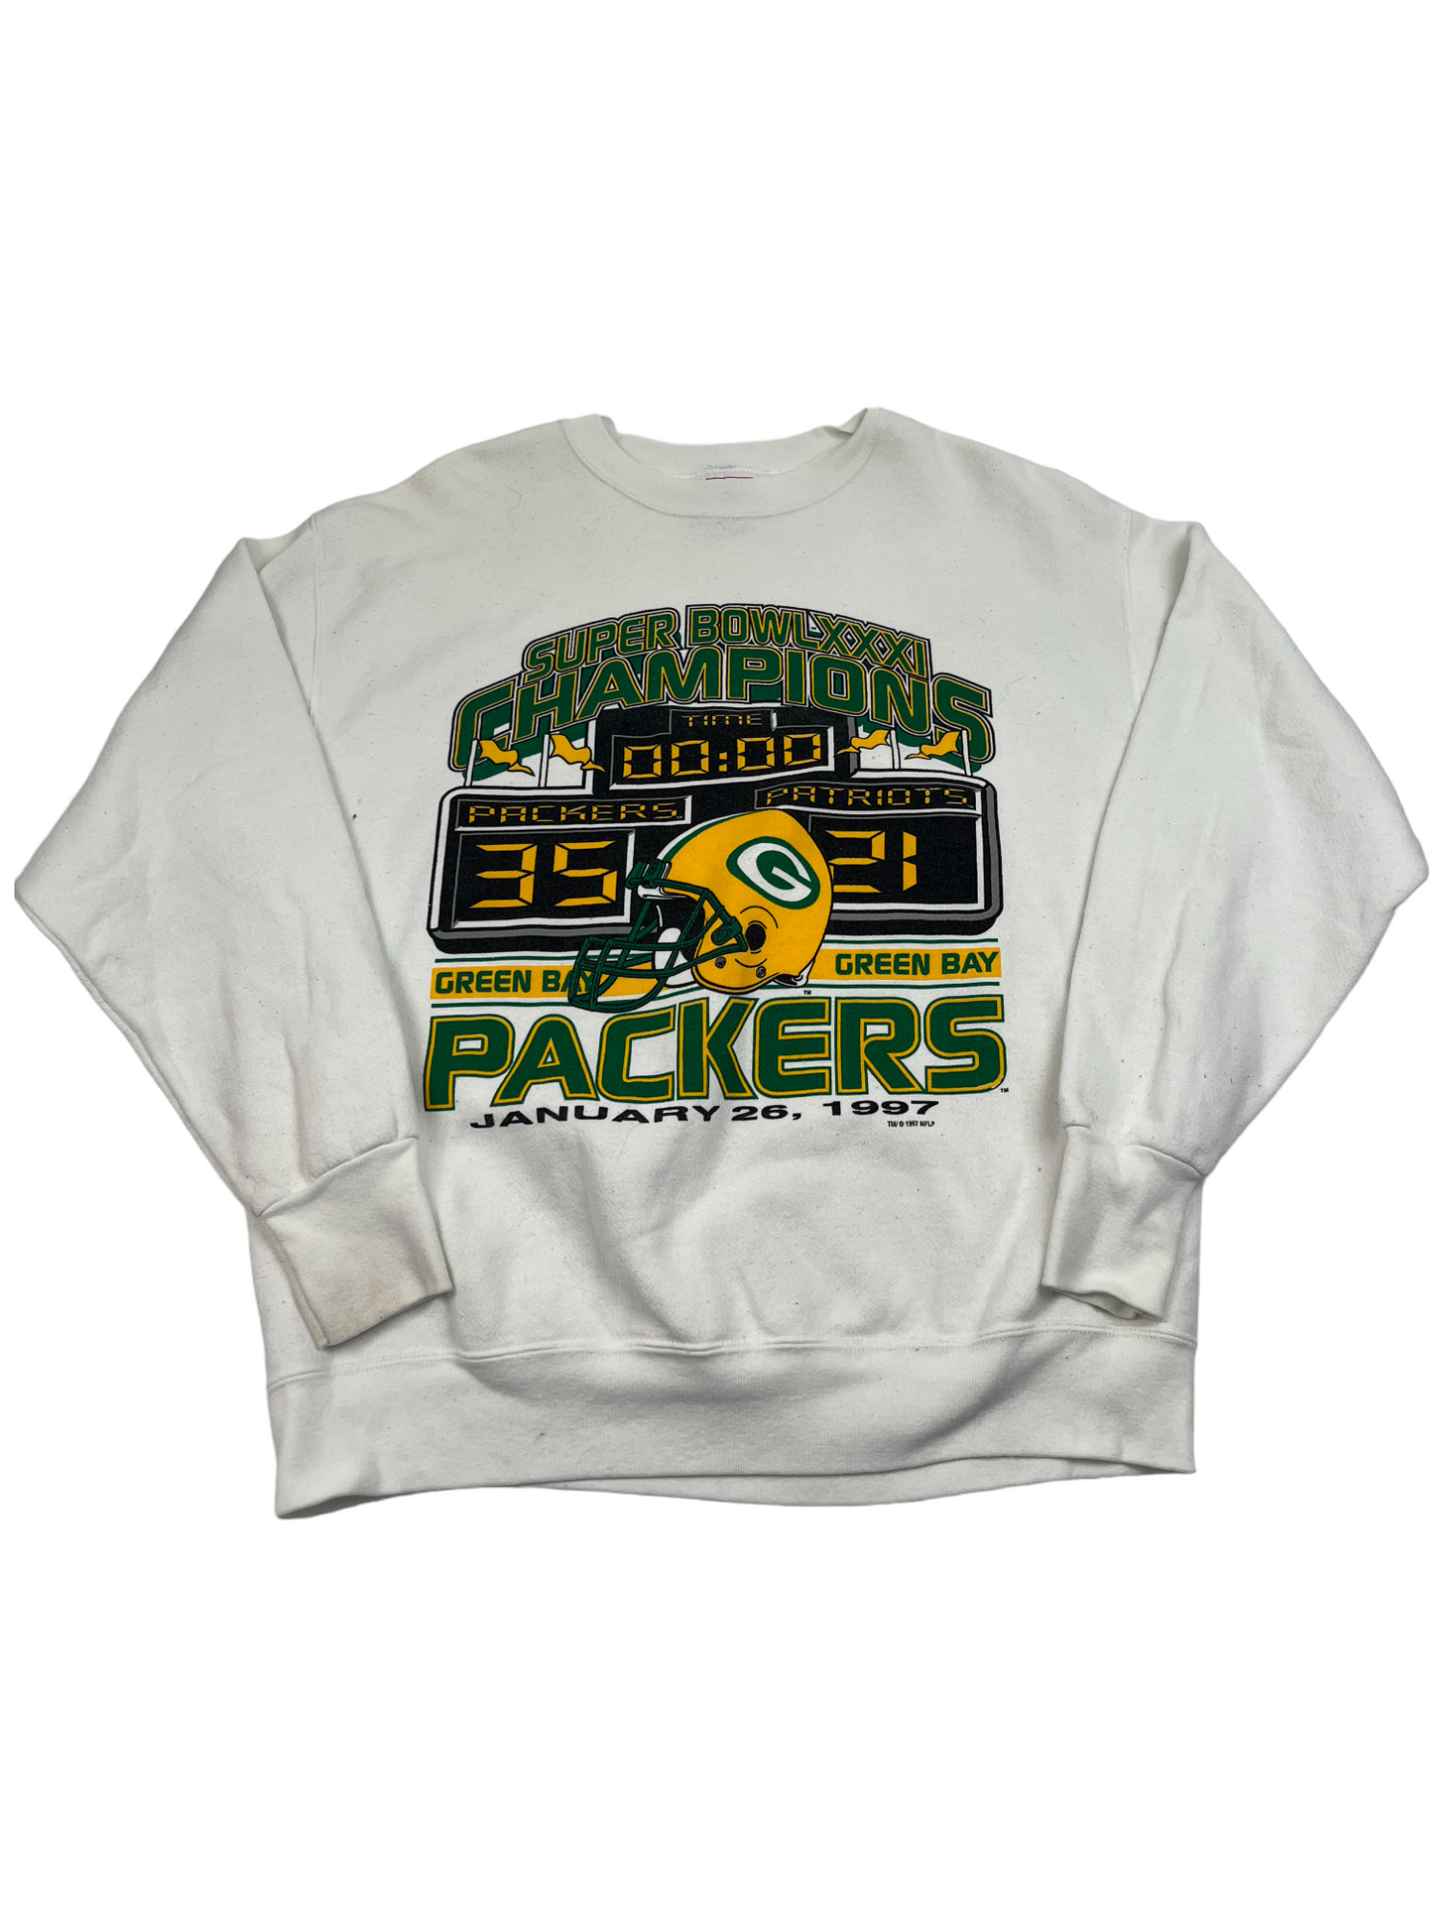 SuperBowls Champions Packers White Crewneck